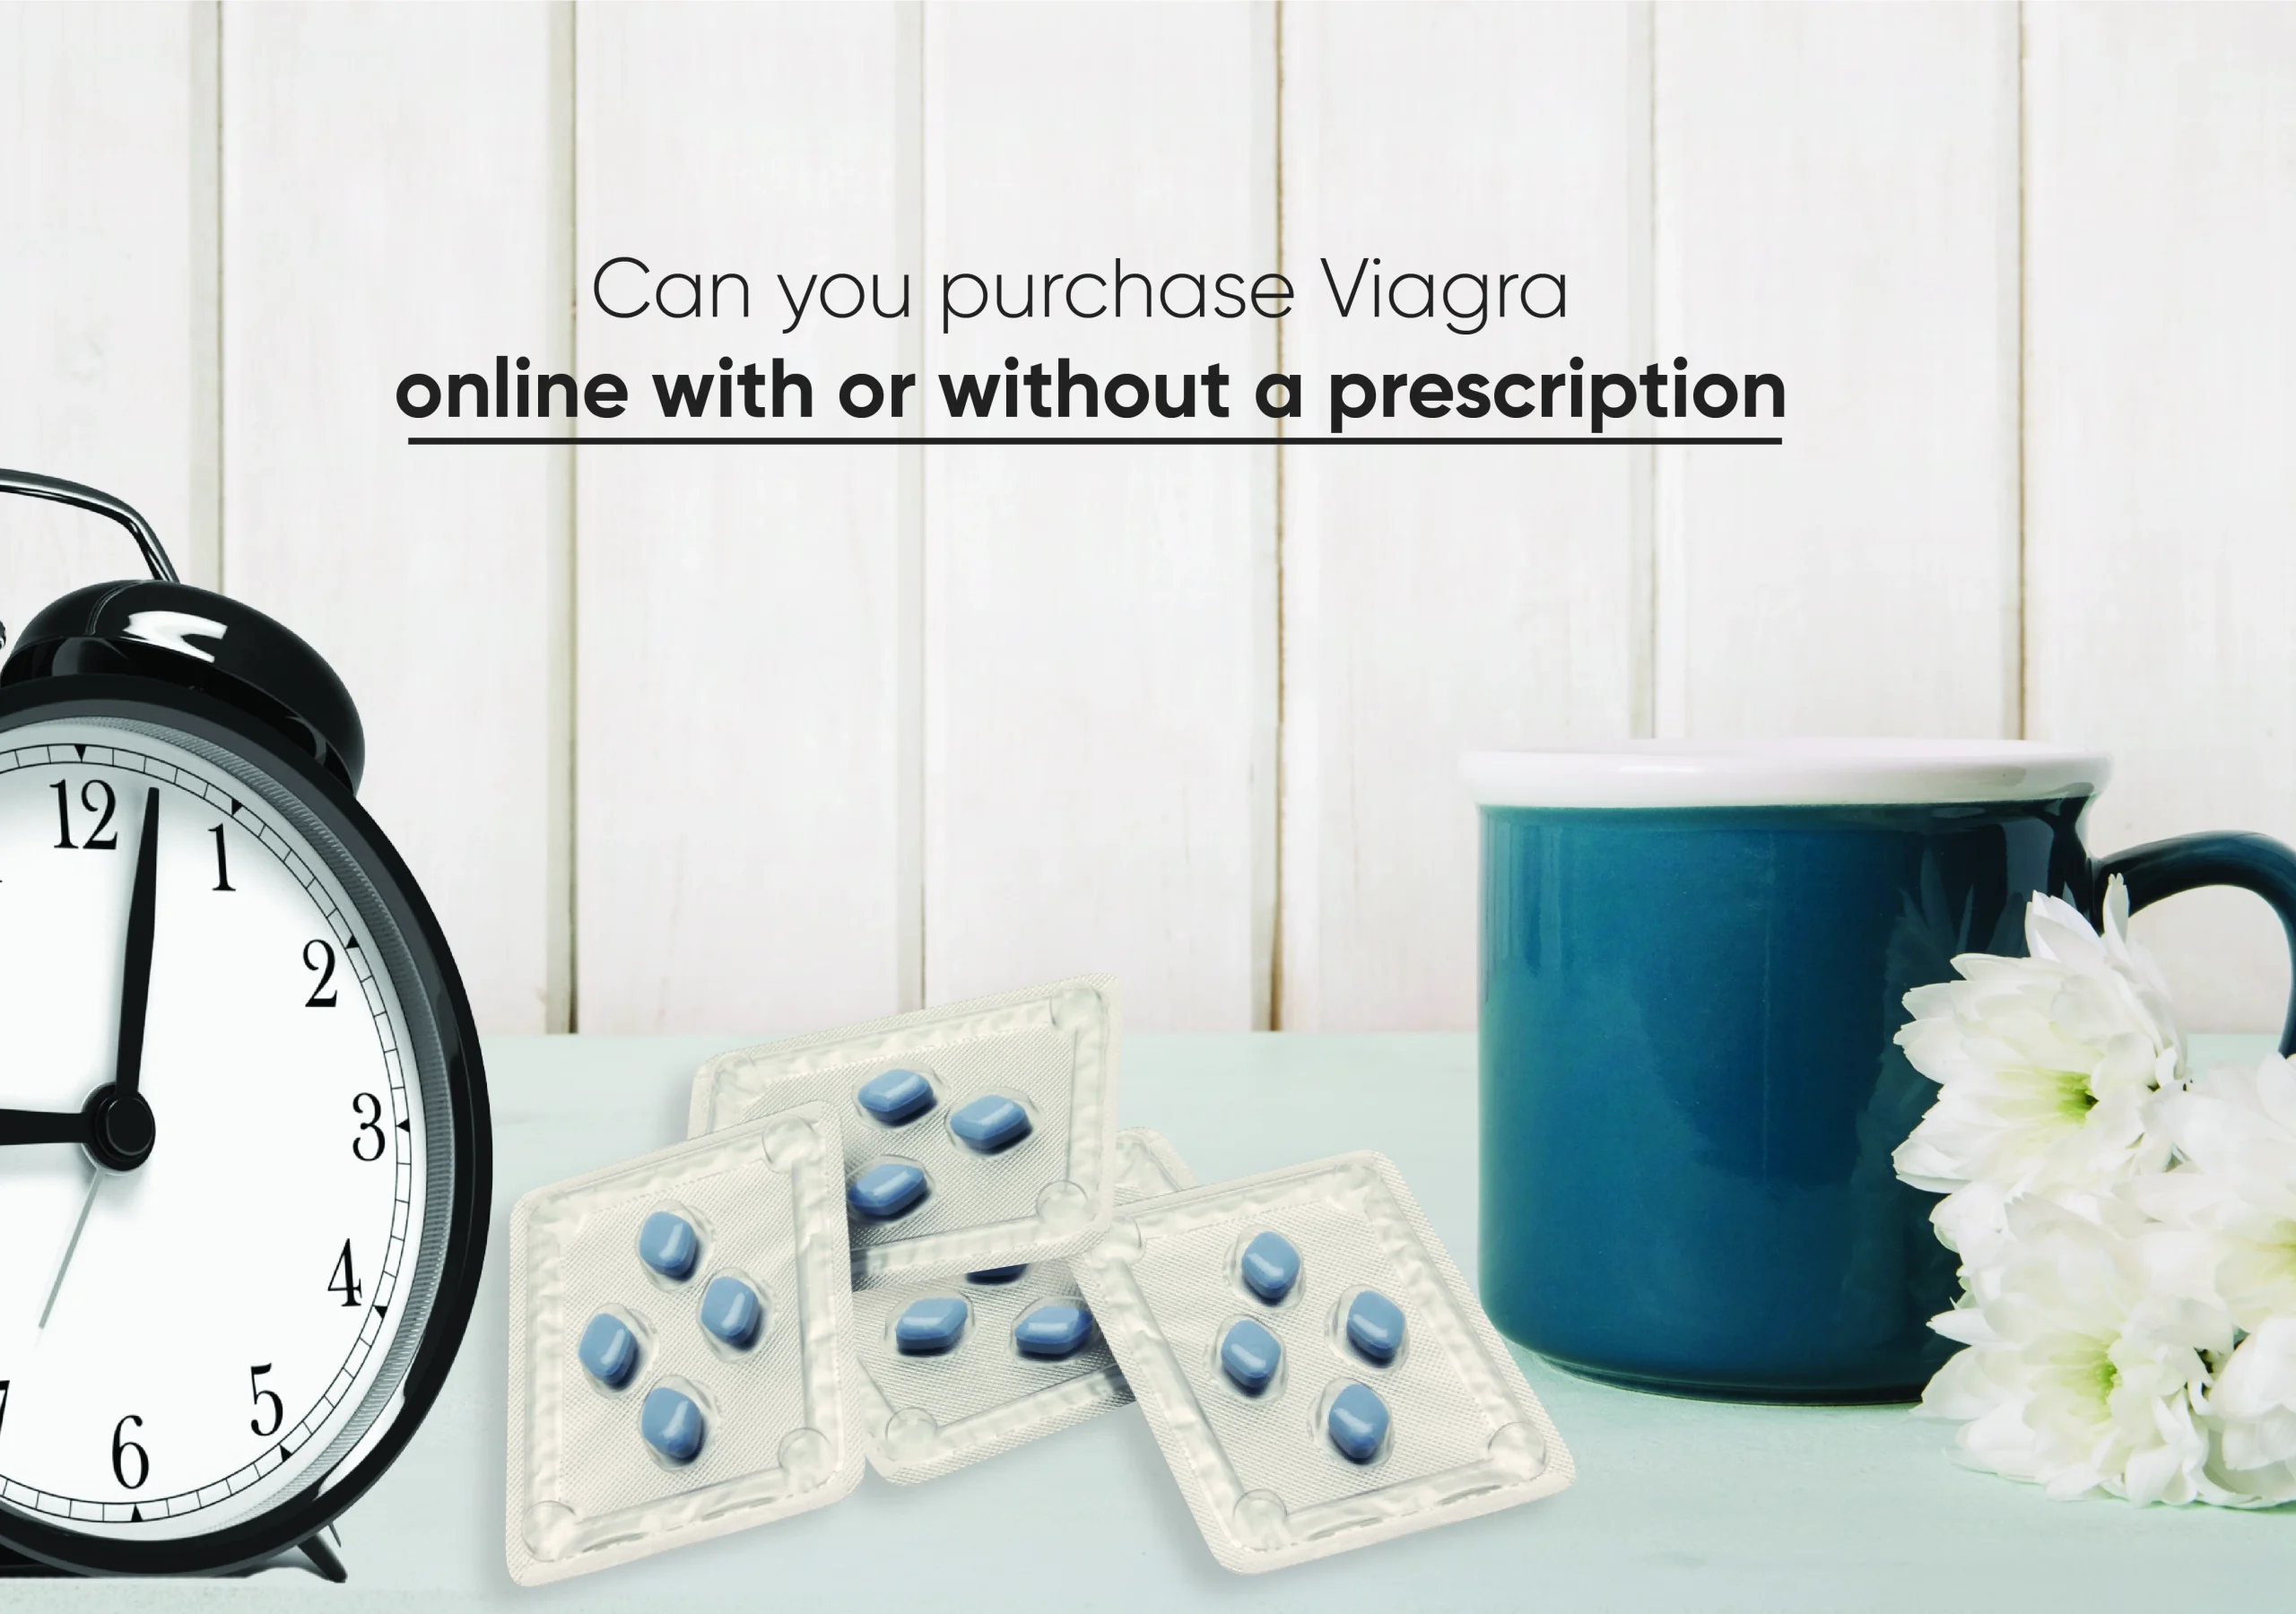 can-you-purchase-viagra-online-with-or-without-a-prescription.